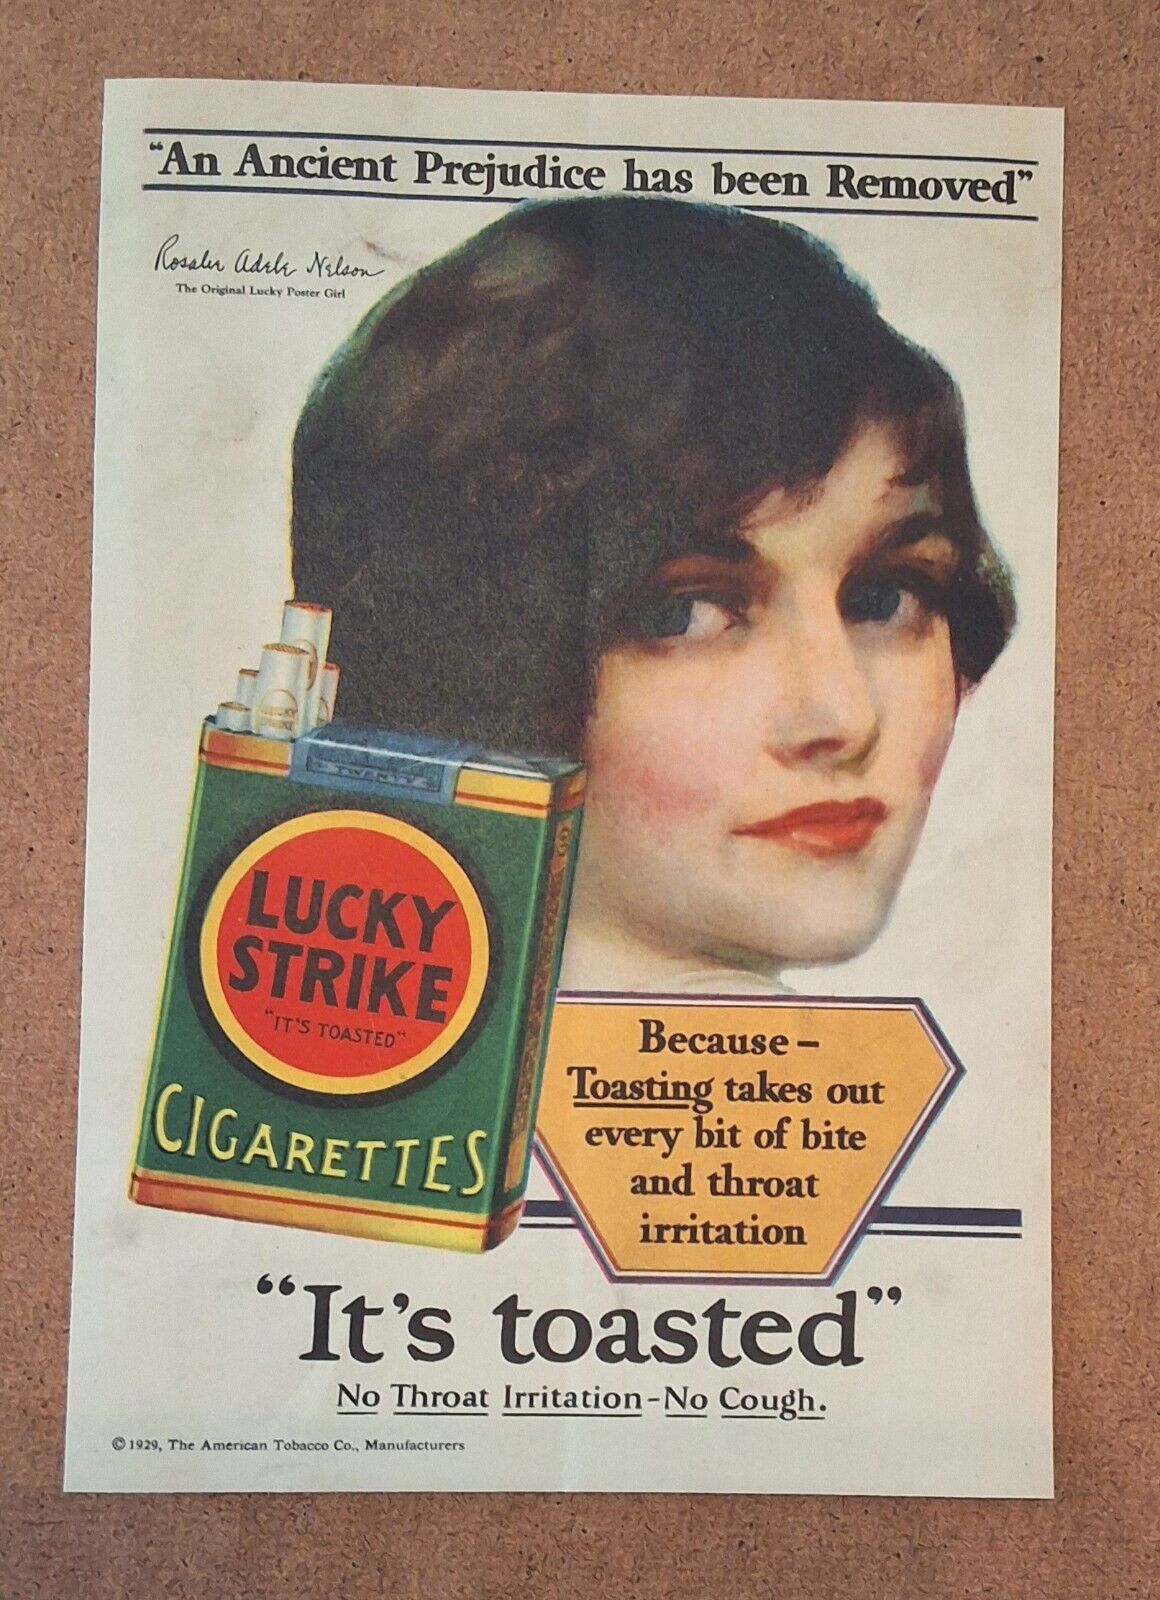 Lucky Strike Cigarettes It's Toasted - Rosalie Adele Nelson - 1929 Art Deco AD 